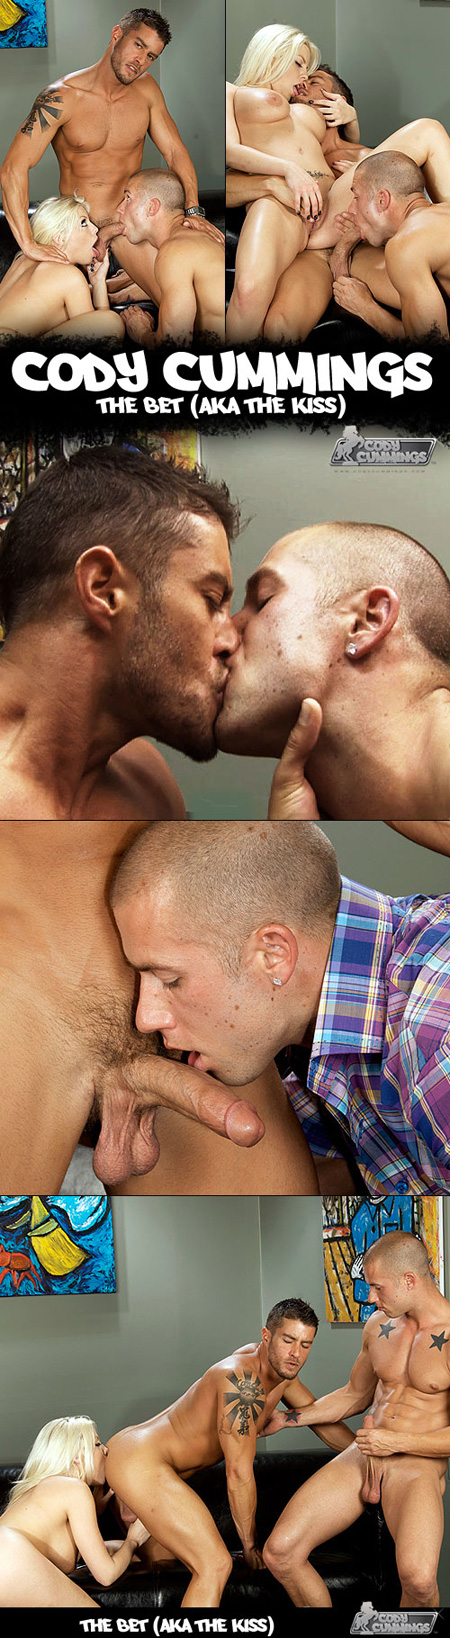 My First Gay Kiss 67